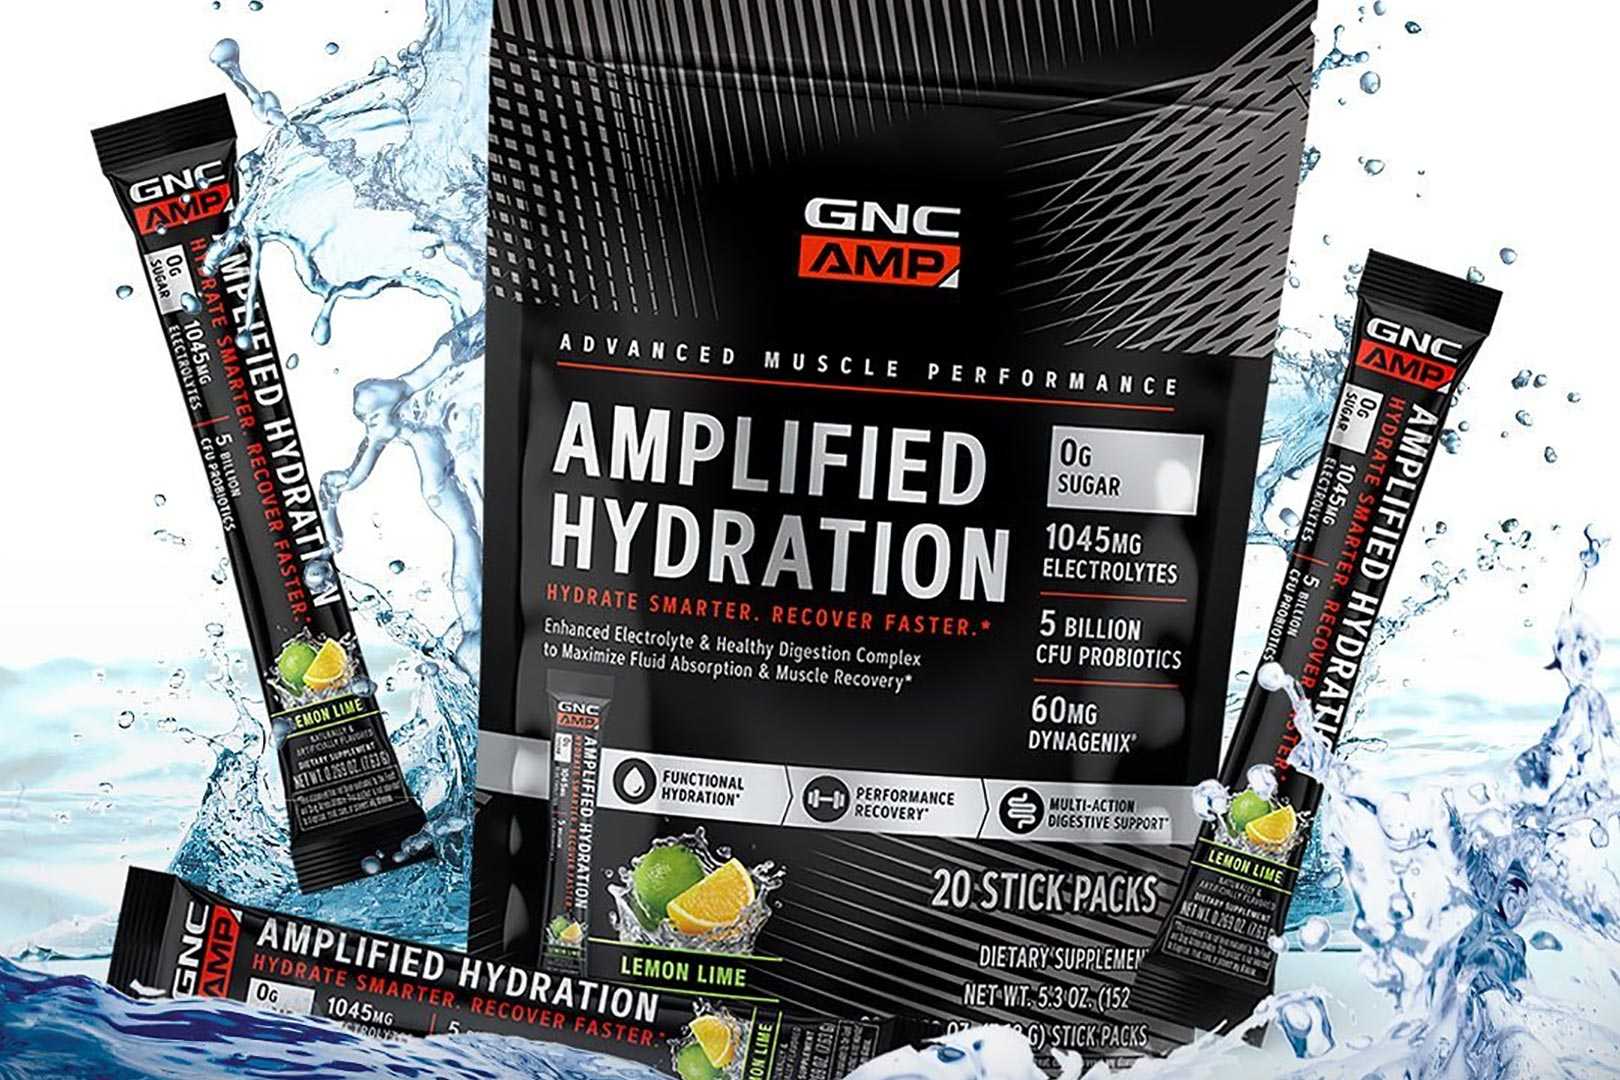 Gnc Amp Amplified Hydration